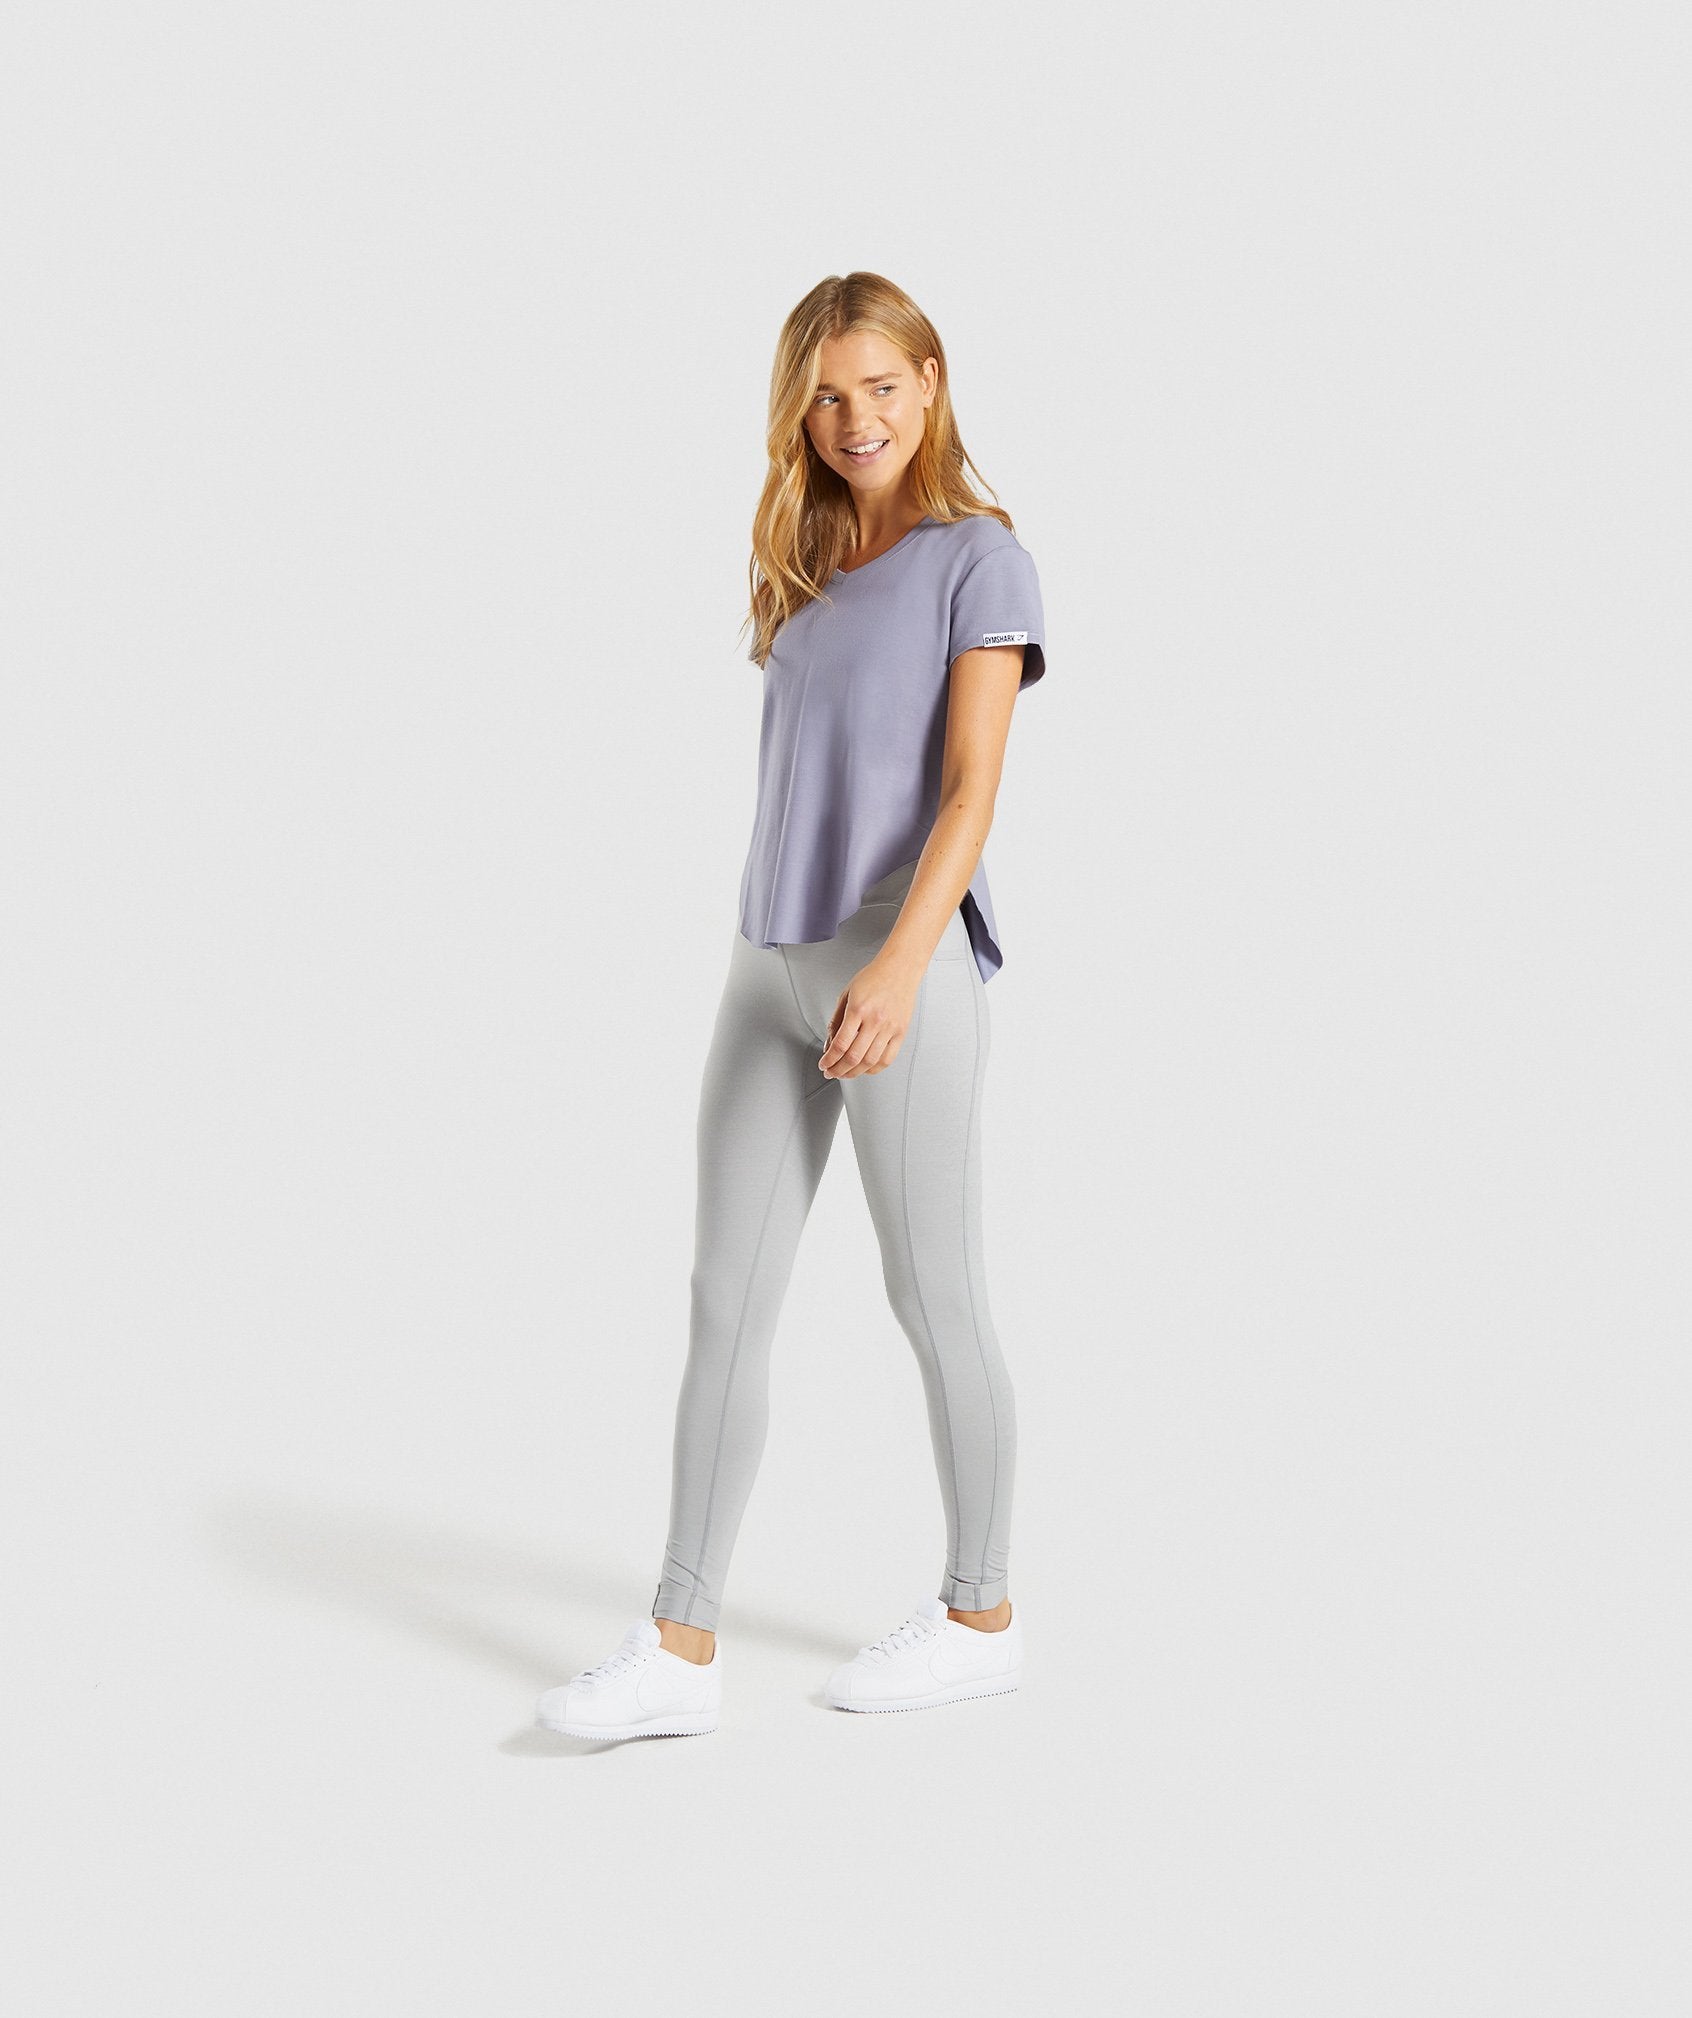 Slounge Cinched Tee in Steel Blue - view 6